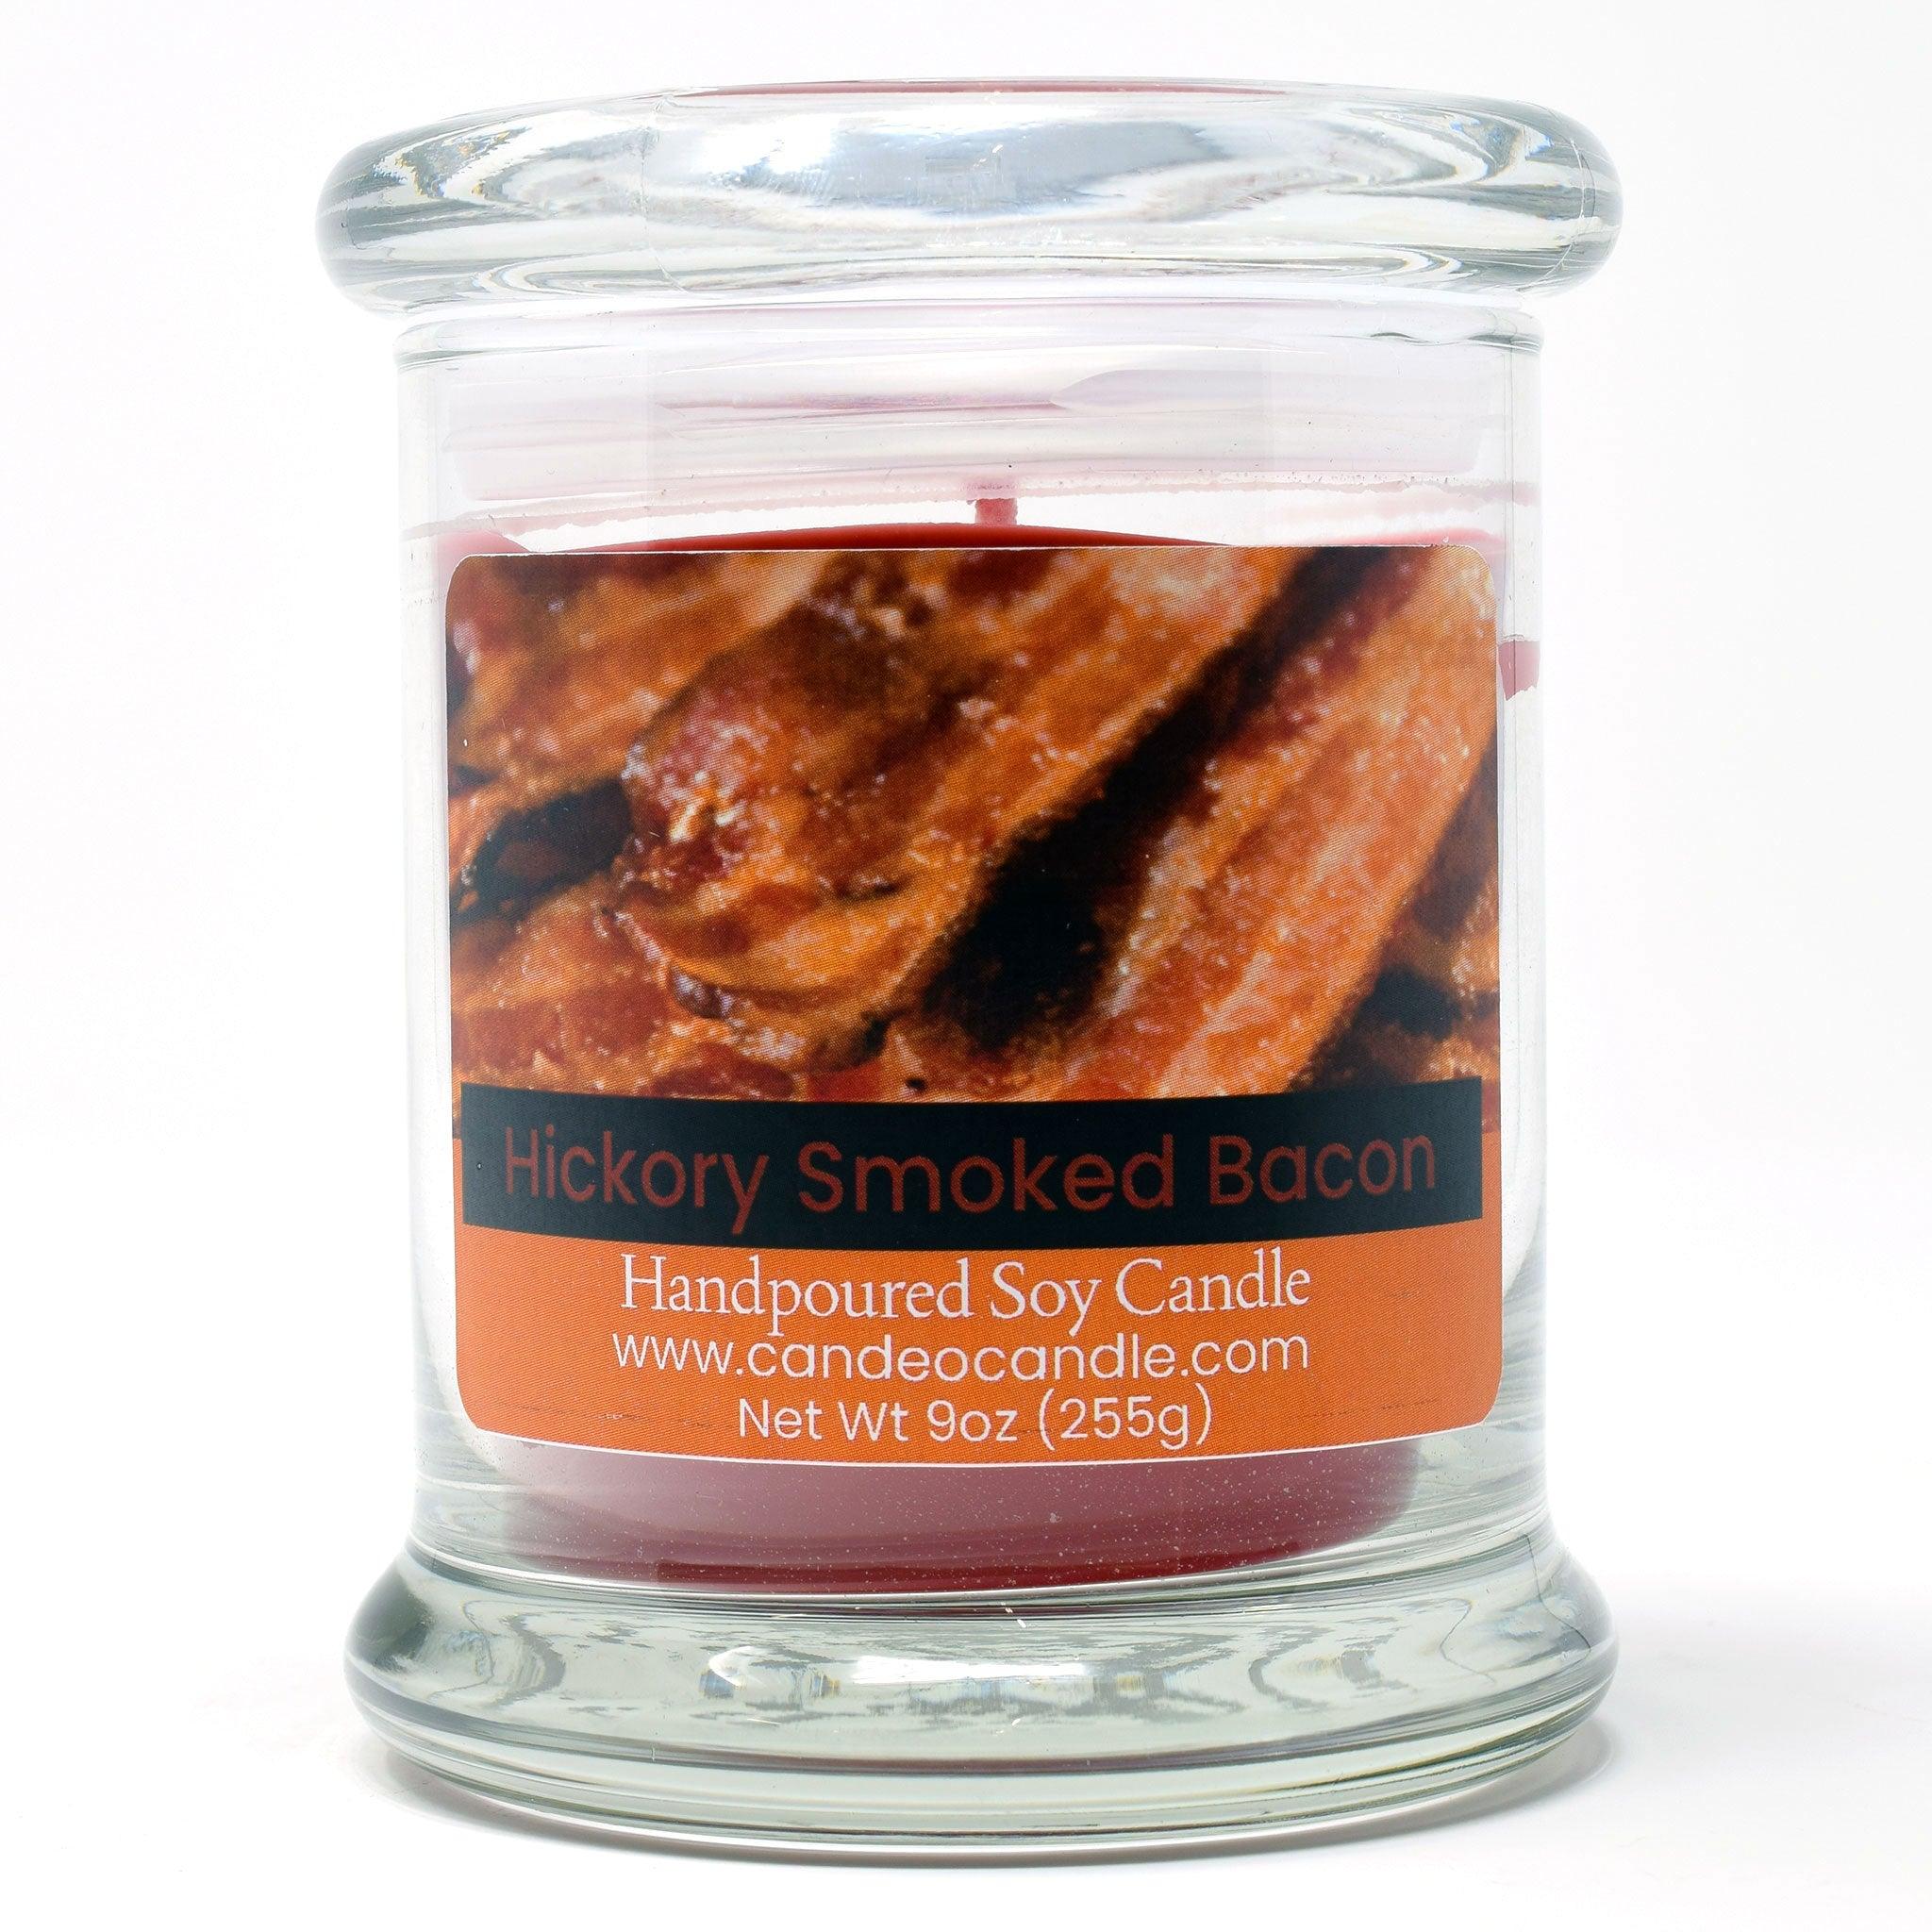 Hickory Smoked Bacon, 9oz Soy Candle Jar - Candeo Candle